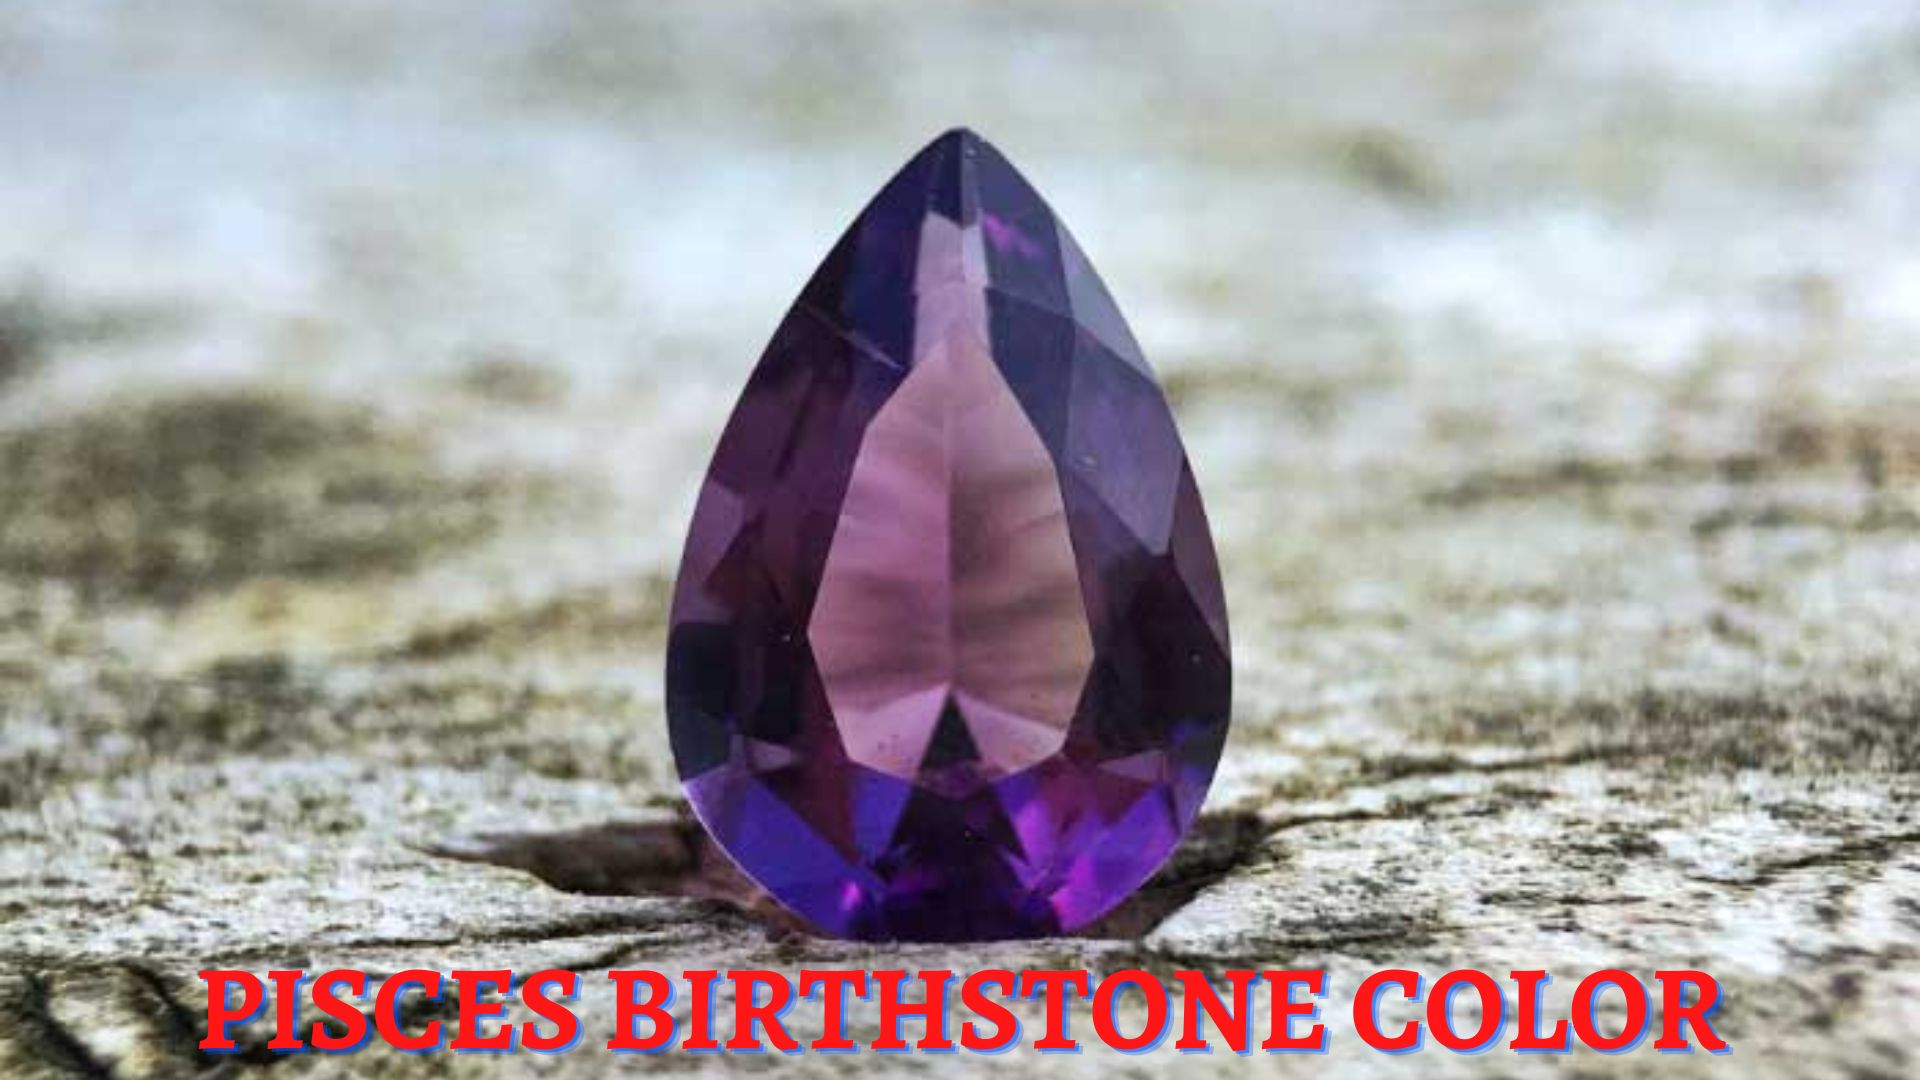 Pisces Birthstone Color - For Those Born In The Month Of March